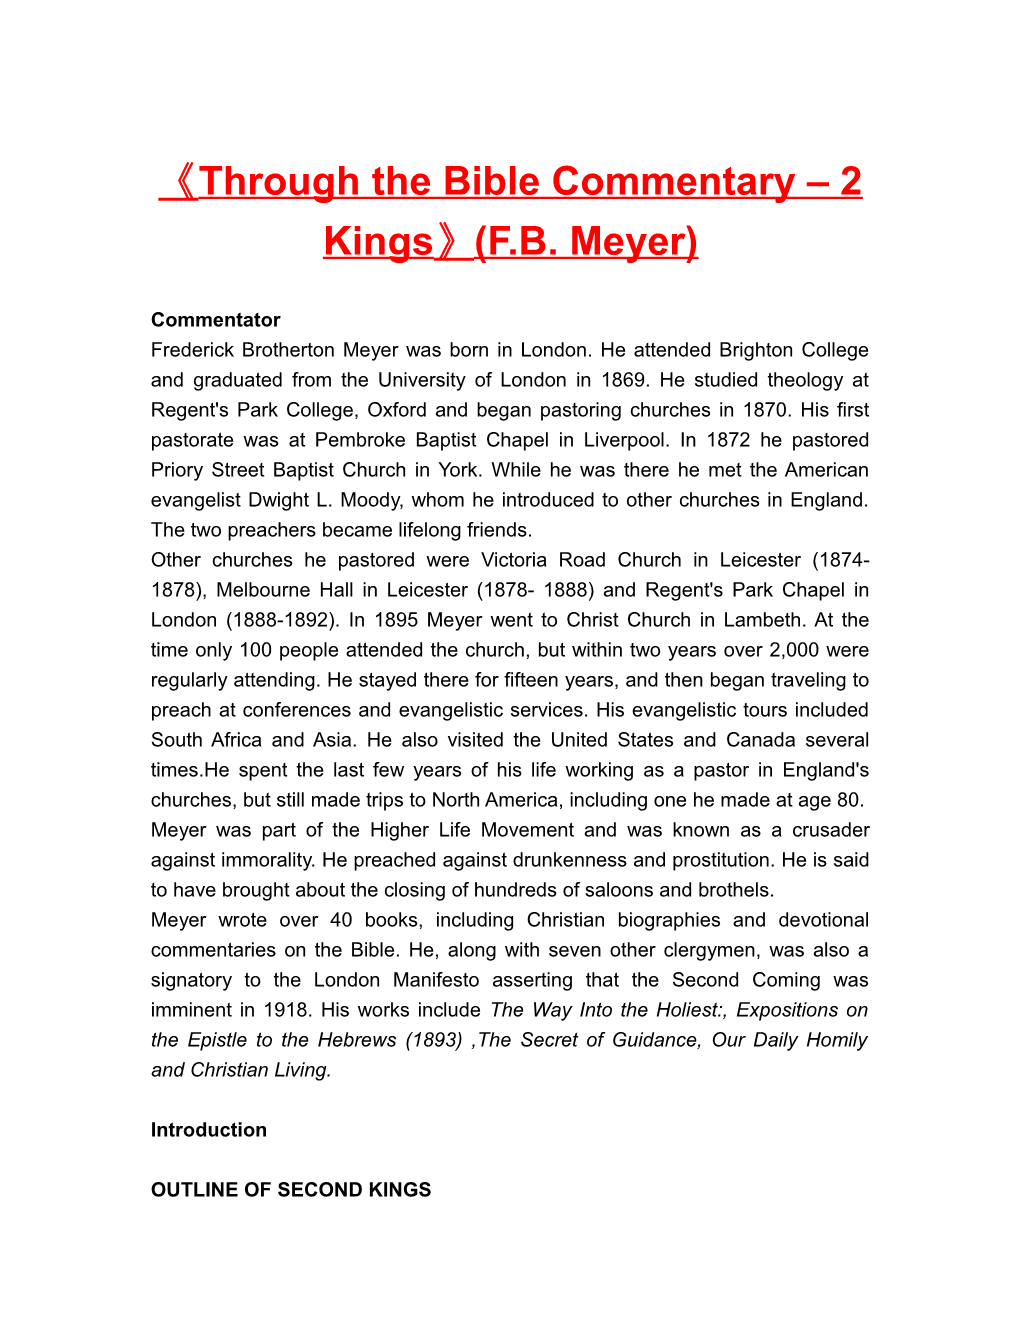 Through the Bible Commentary 2 Kings (F.B. Meyer)